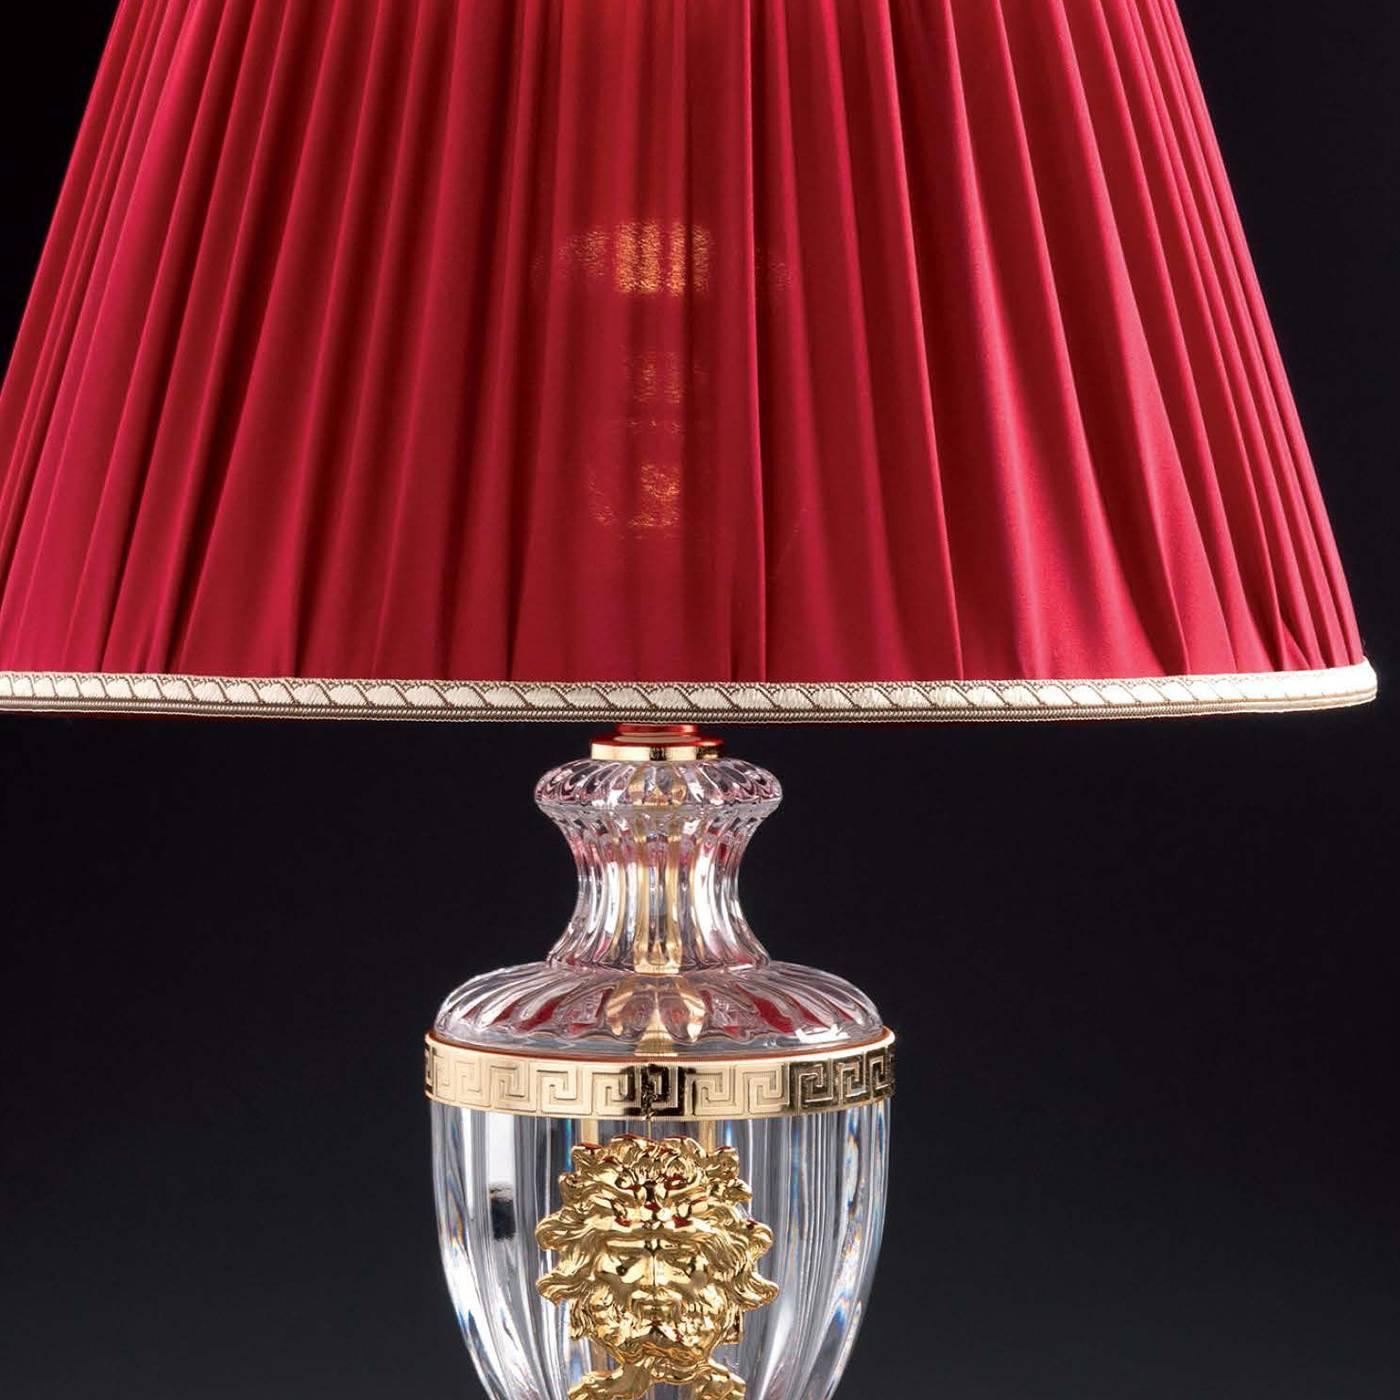 The body of this elegant lamp is crafted in striking clear crystal that has been adorned with 24-karat gold-plated brass accents. The base is in 24-karat gold-plated brass as well. The lamp is topped with a rich red lampshade for a luxurious effect.